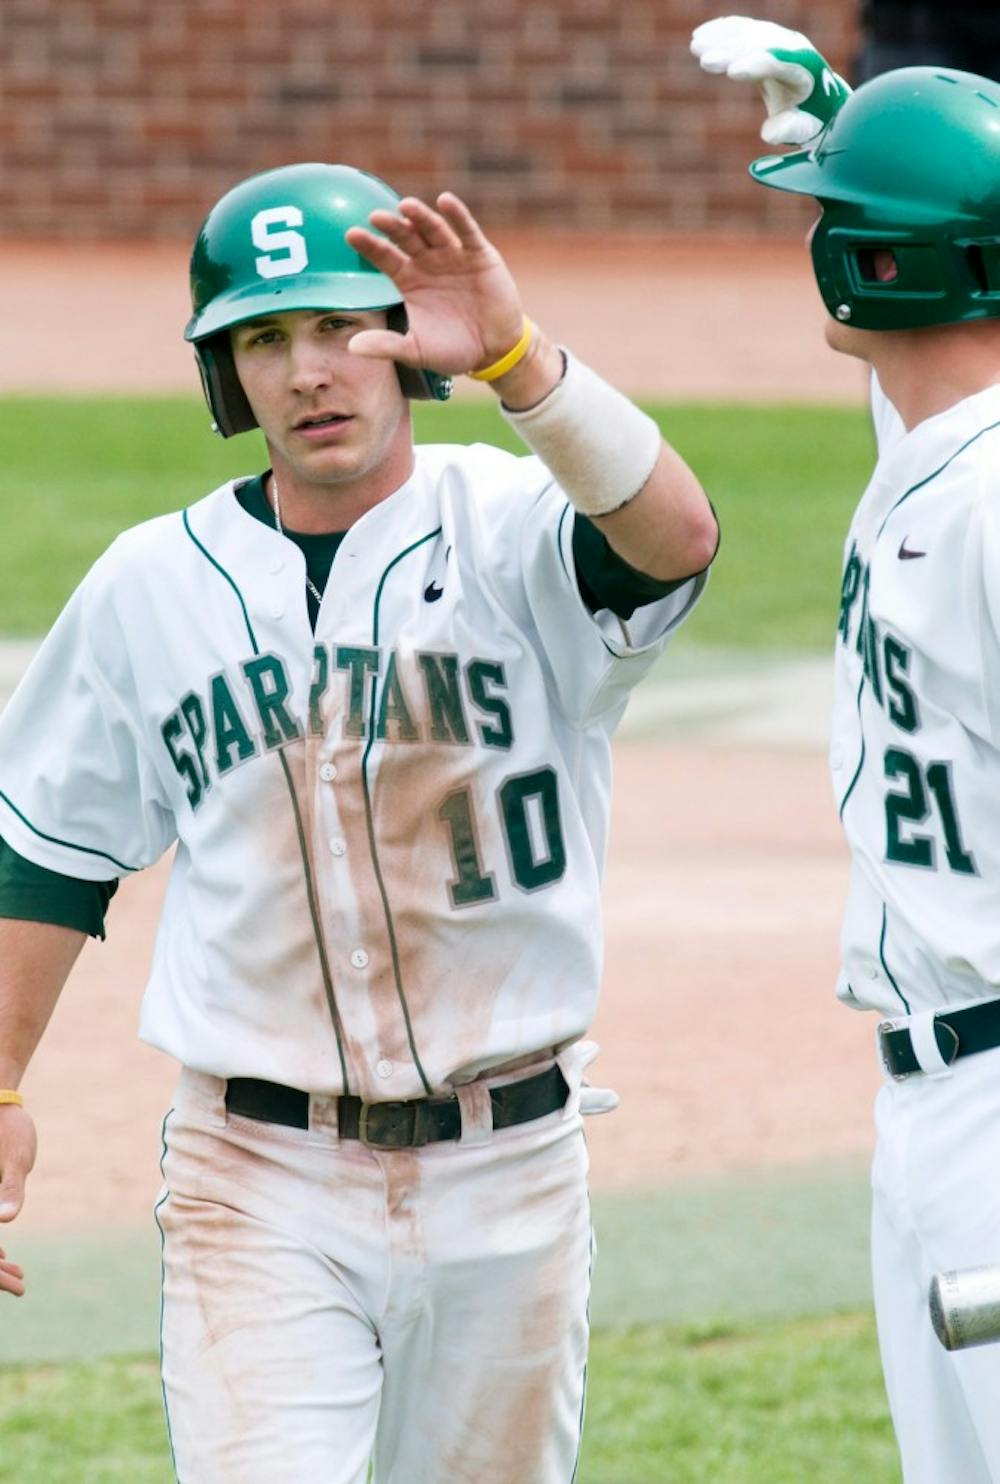 Second baseman freshman Ryan Jones high fives his teammate, senior infielder Chris Roberts after scoring a run during Saturday's game against Indiana University. Jones hit for the cycle, helping to boost the Spartan's to a 10-4 victory over the Hoosiers in the second game of the three game series. The State News File Photo